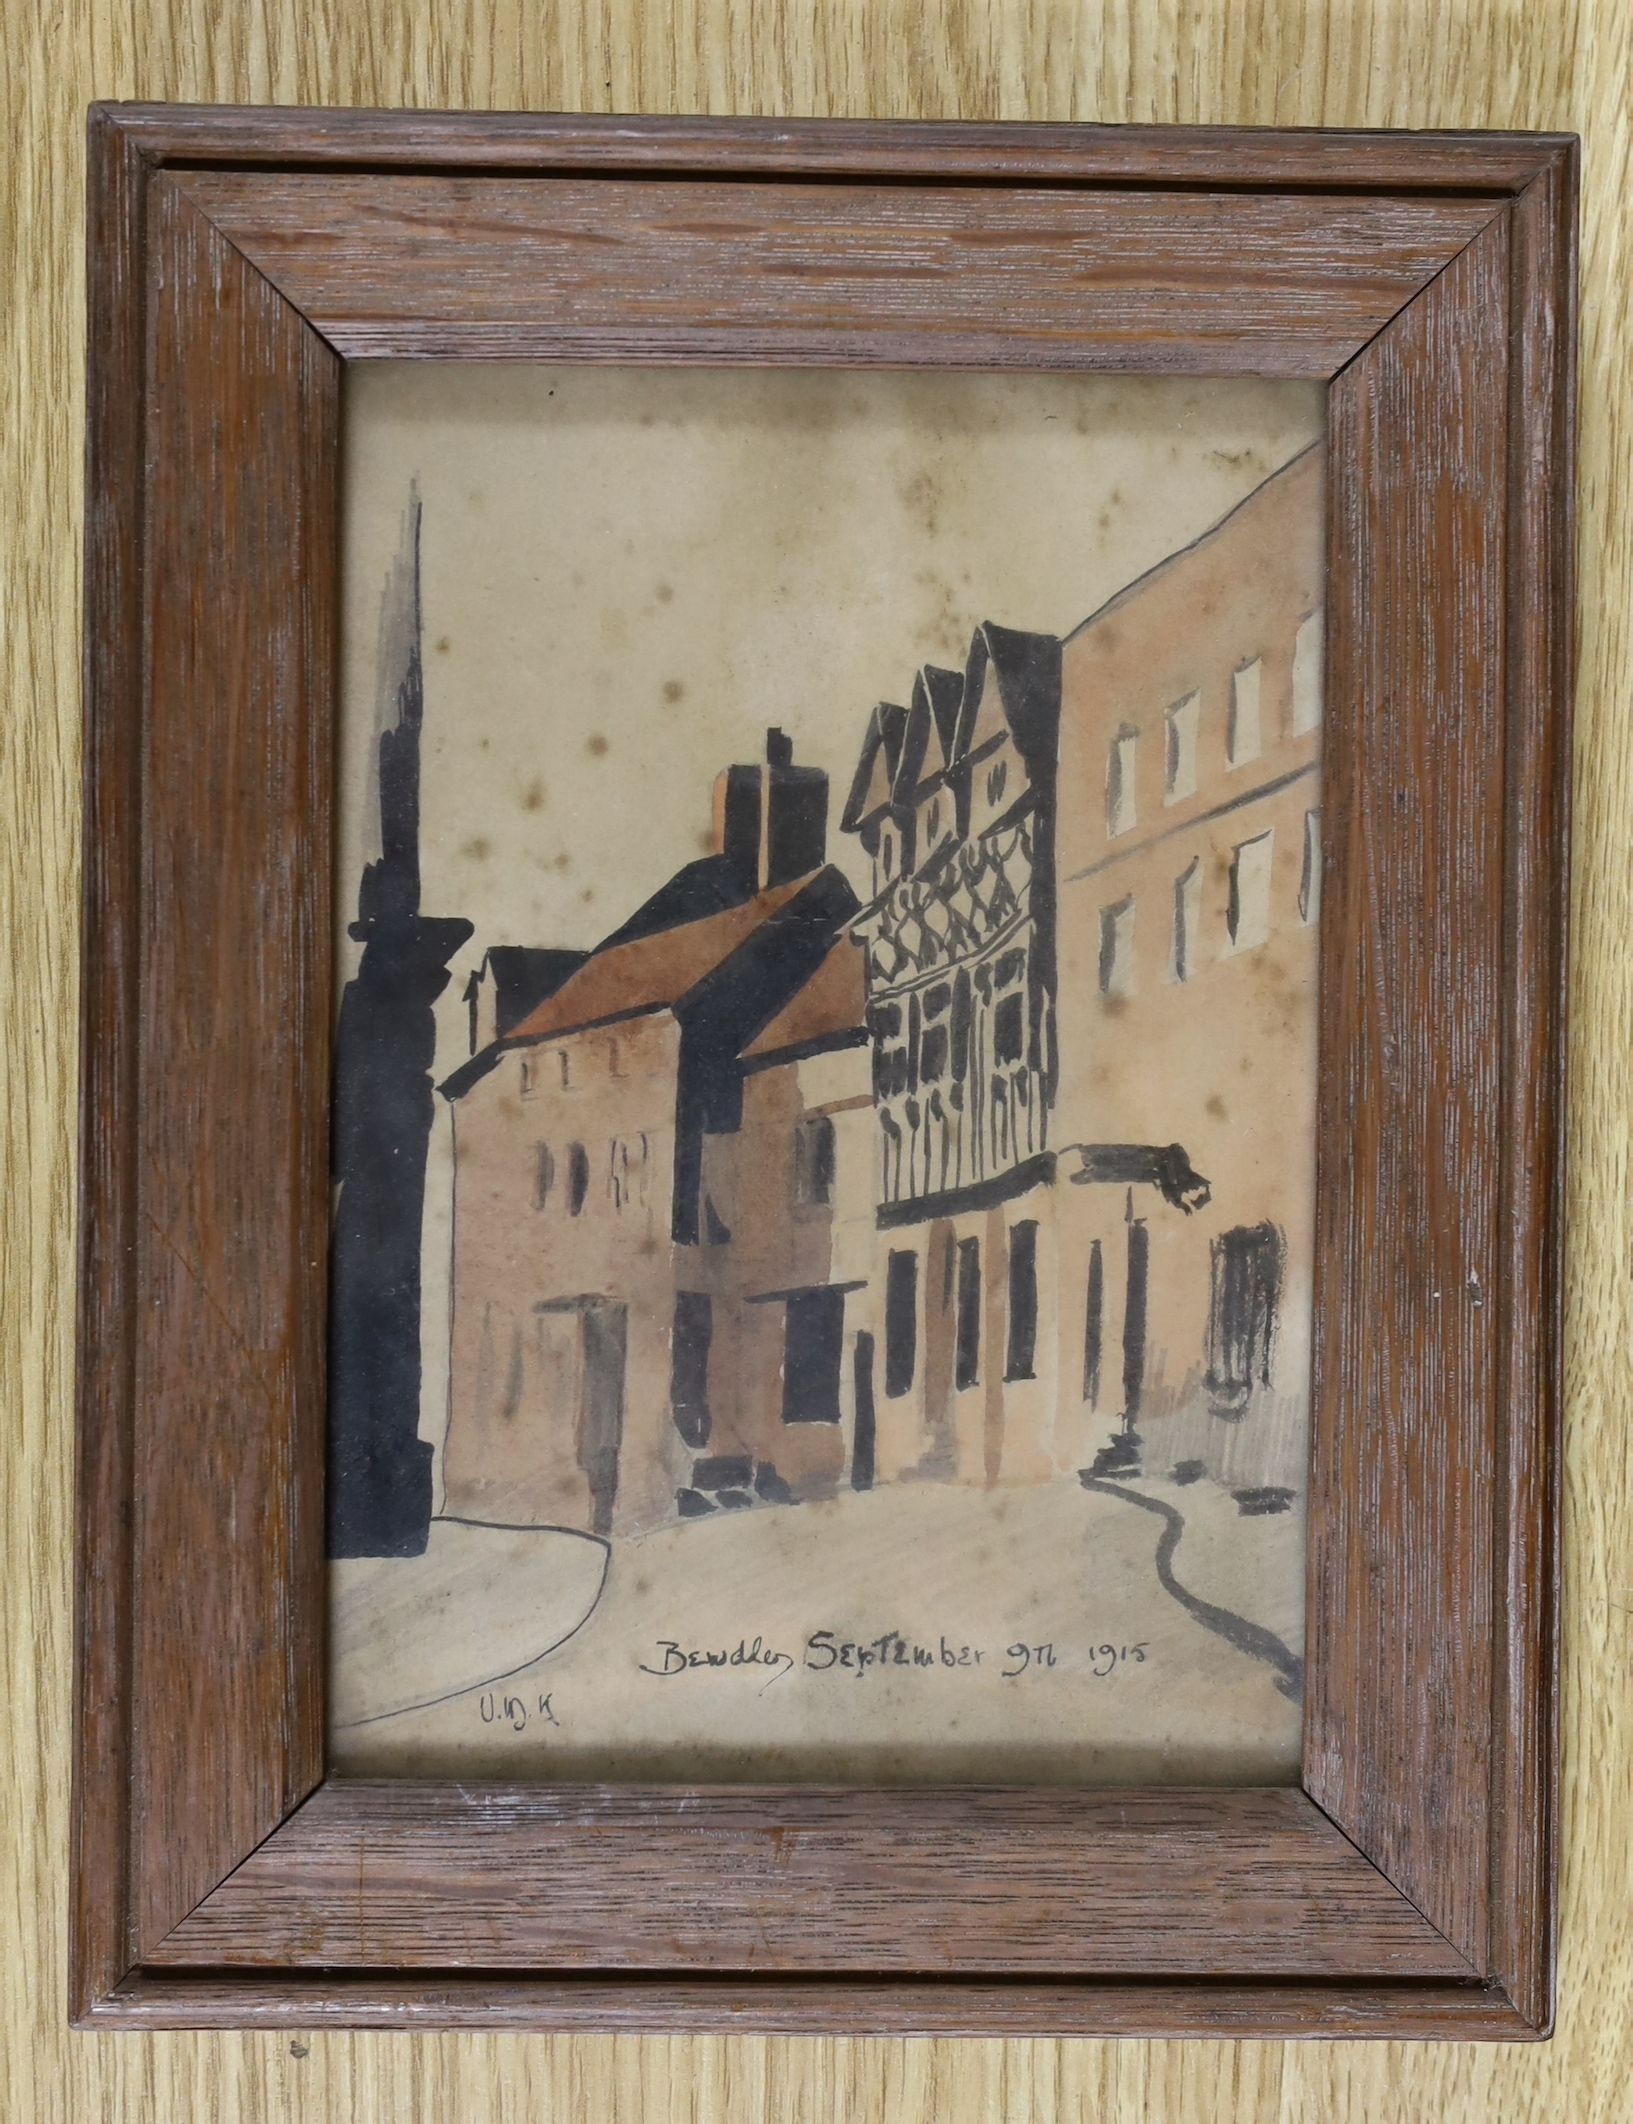 UDK, ink and watercolour, 'Bewdley, September 9th 1915', initialled, 21 x 15cm